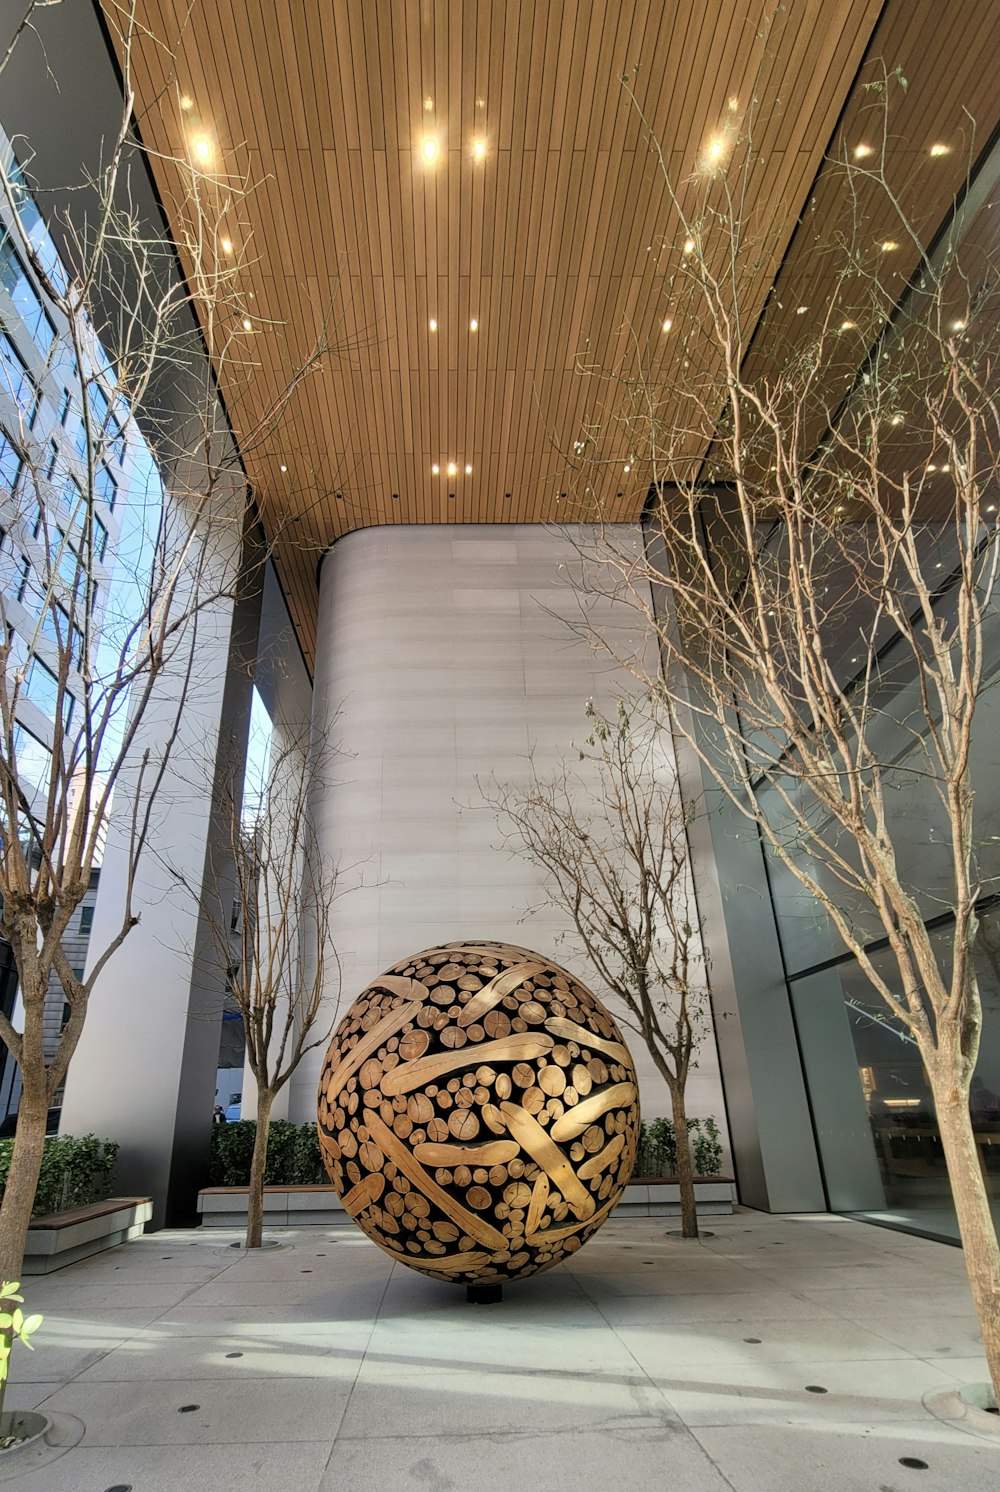 a large ball sitting in the middle of a courtyard